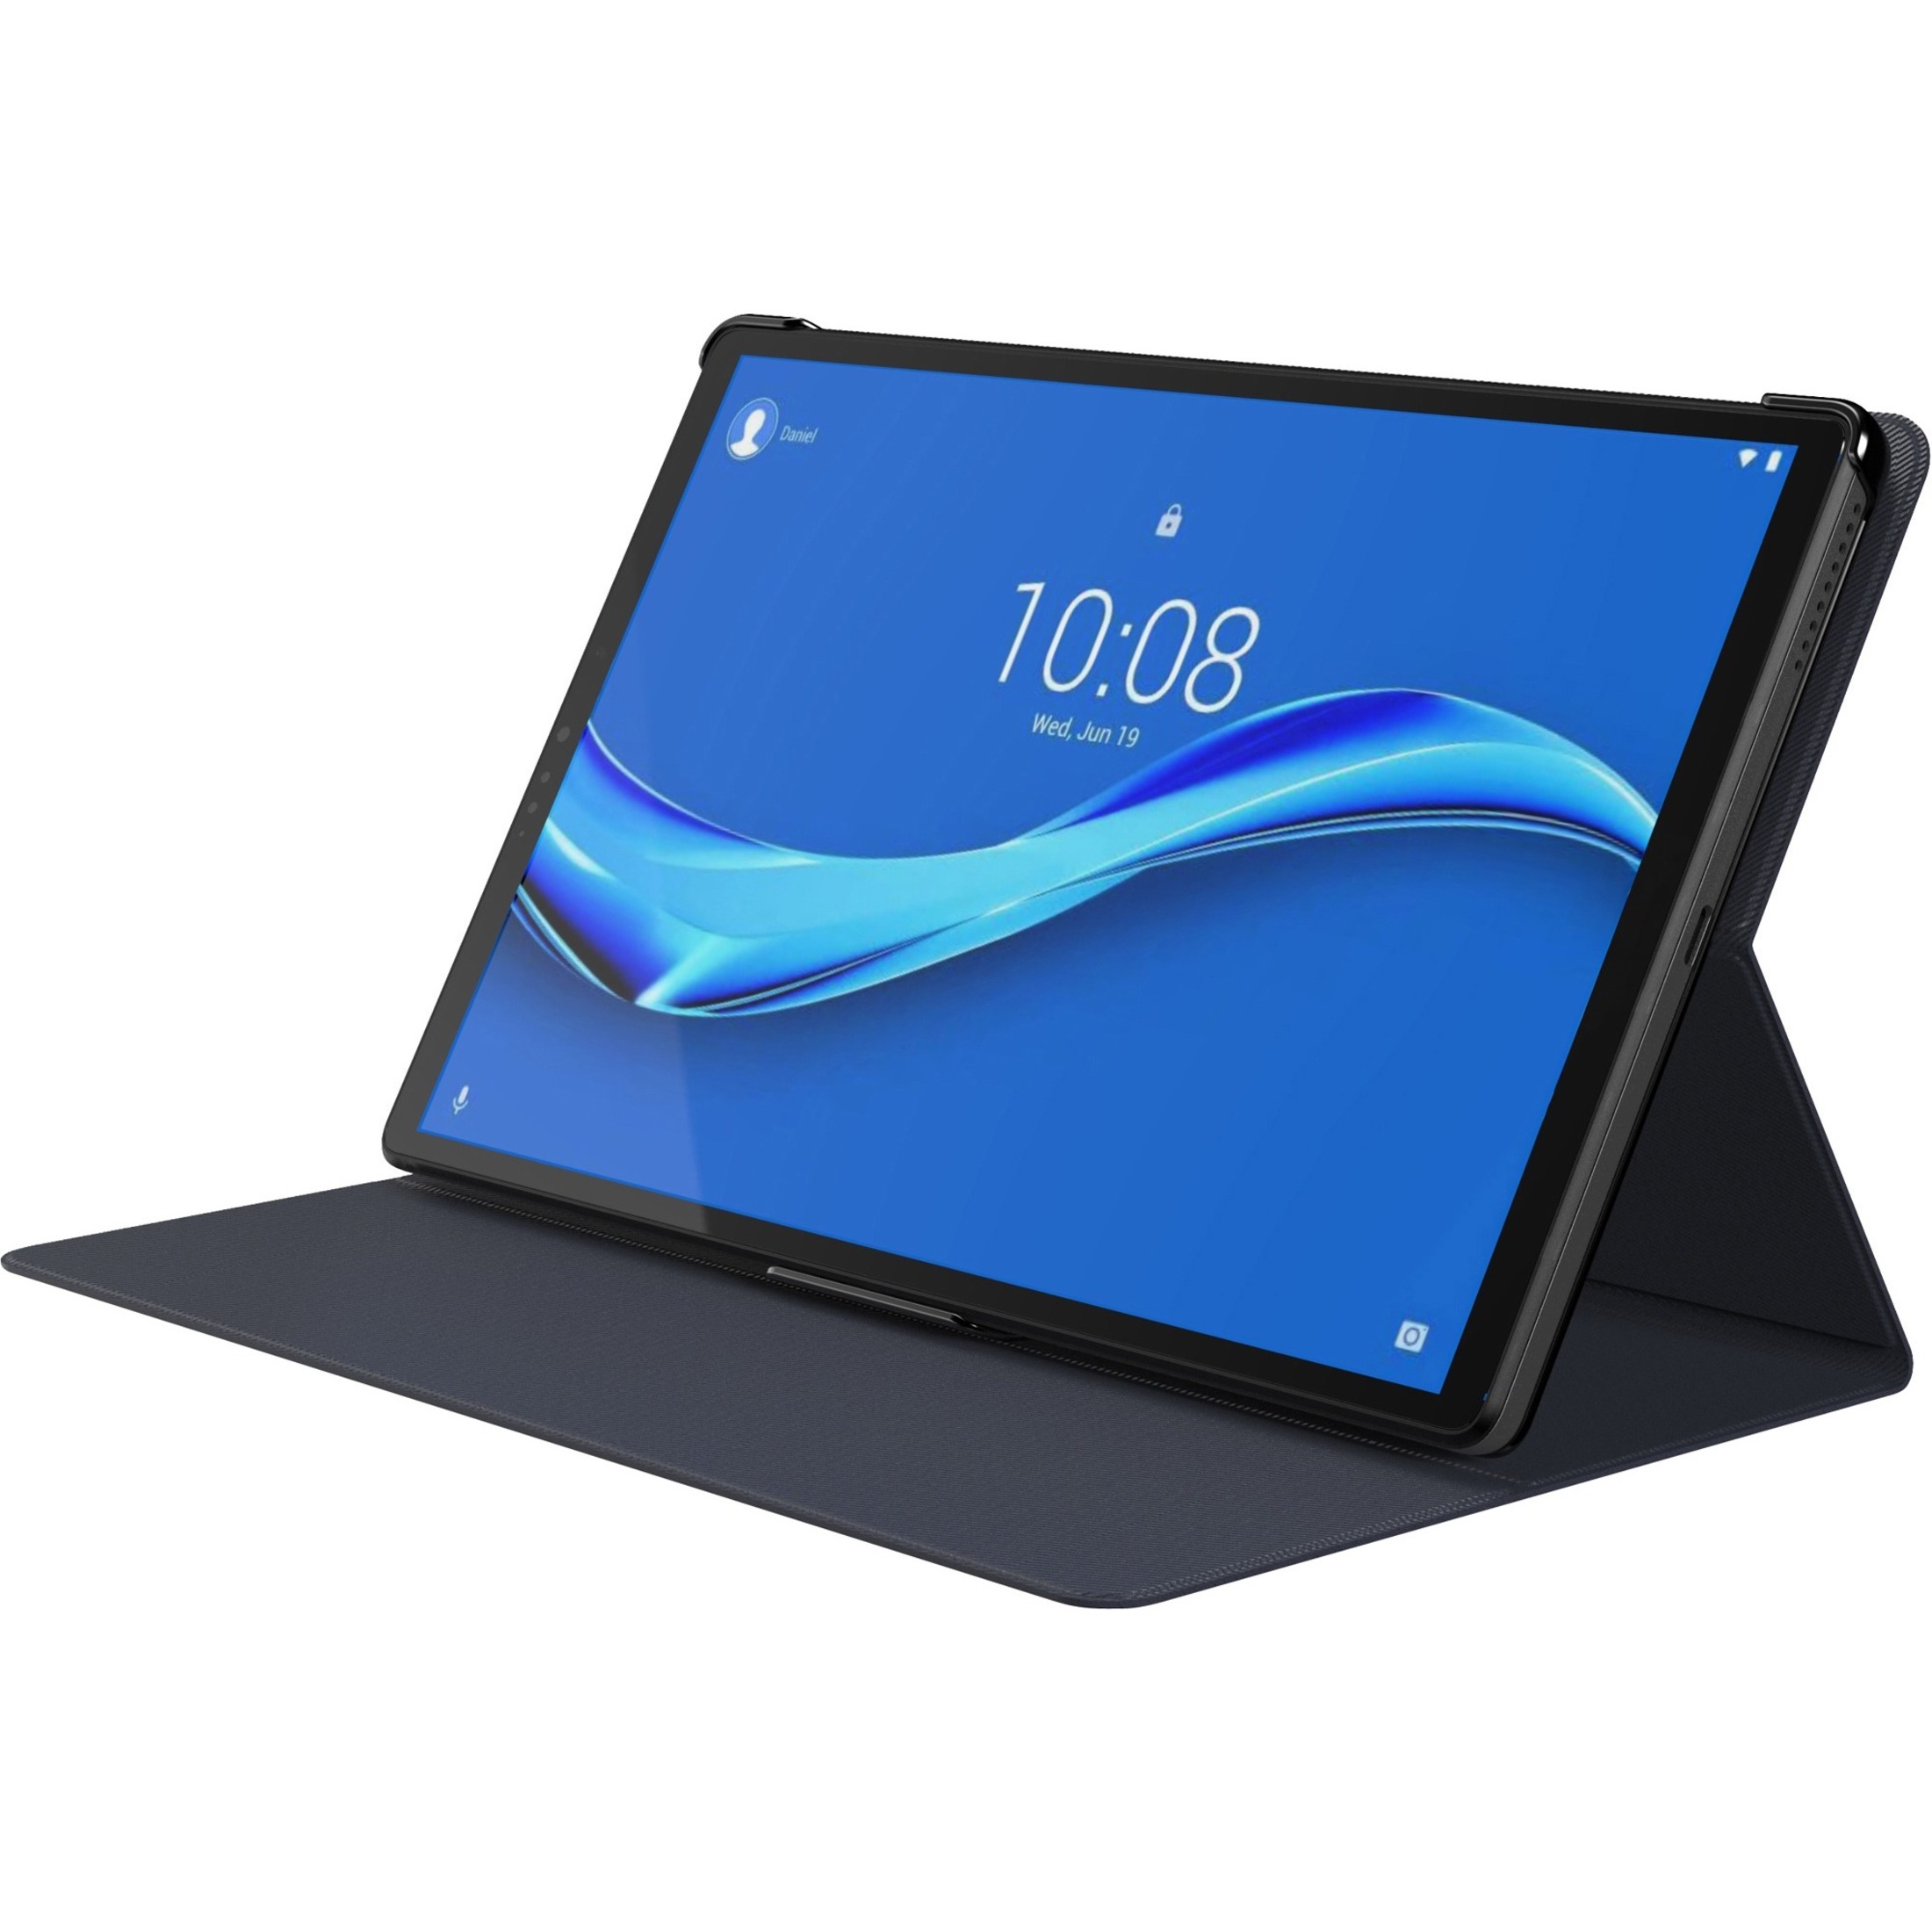 Lenovo Tab M10 10.3" Tablet - MediaTek Helio P22T - 4GB - 64GB FHD Plus with the Smart Charging Station - Android 9.0 (Pie) - image 23 of 33